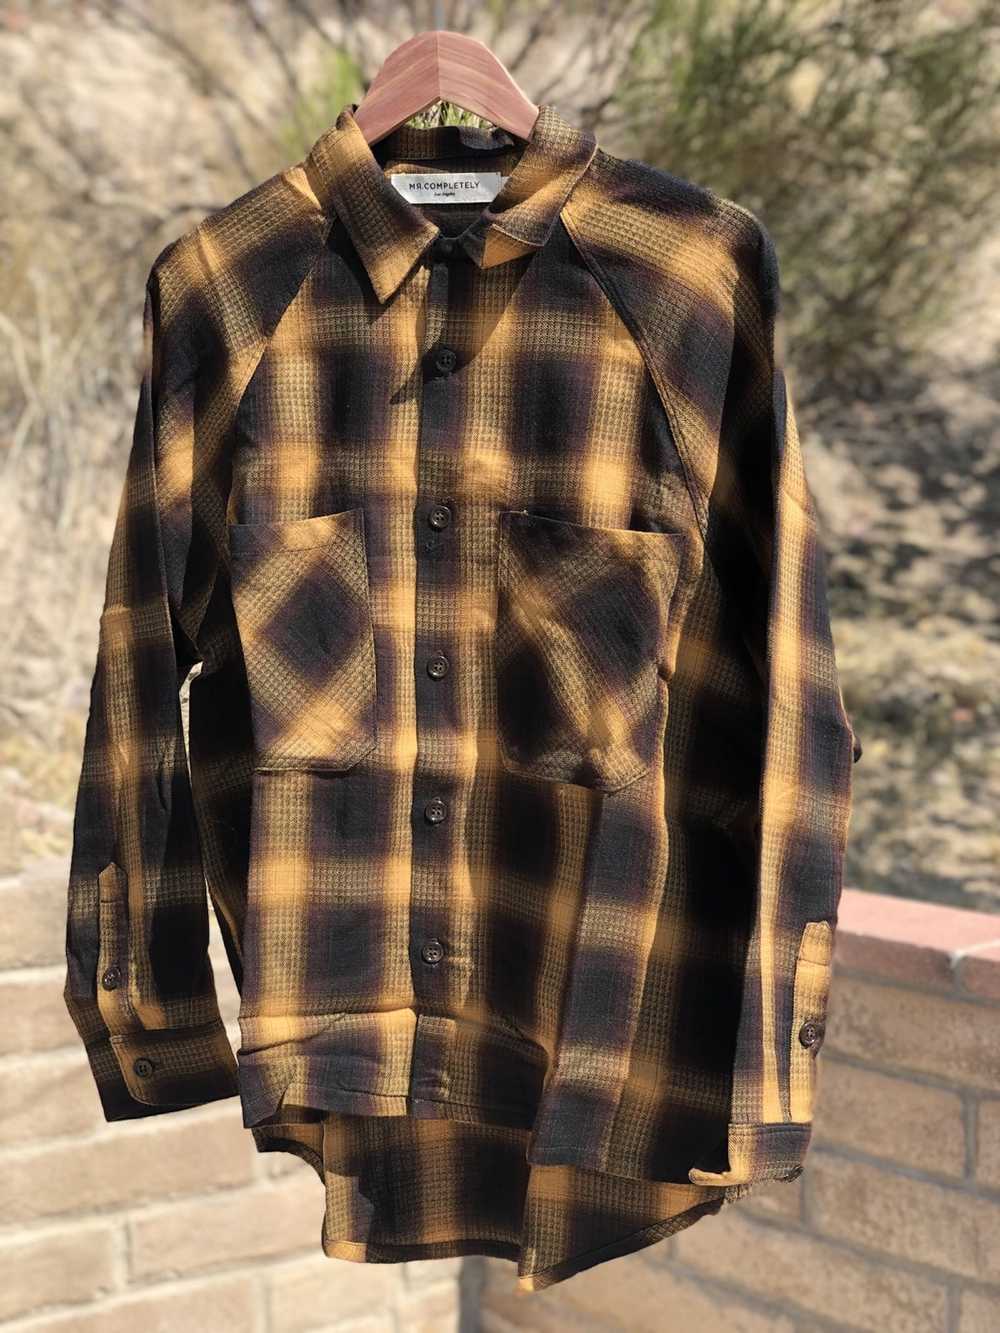 Mr. Completely Flannel Shadow GOLD PLAID - image 1